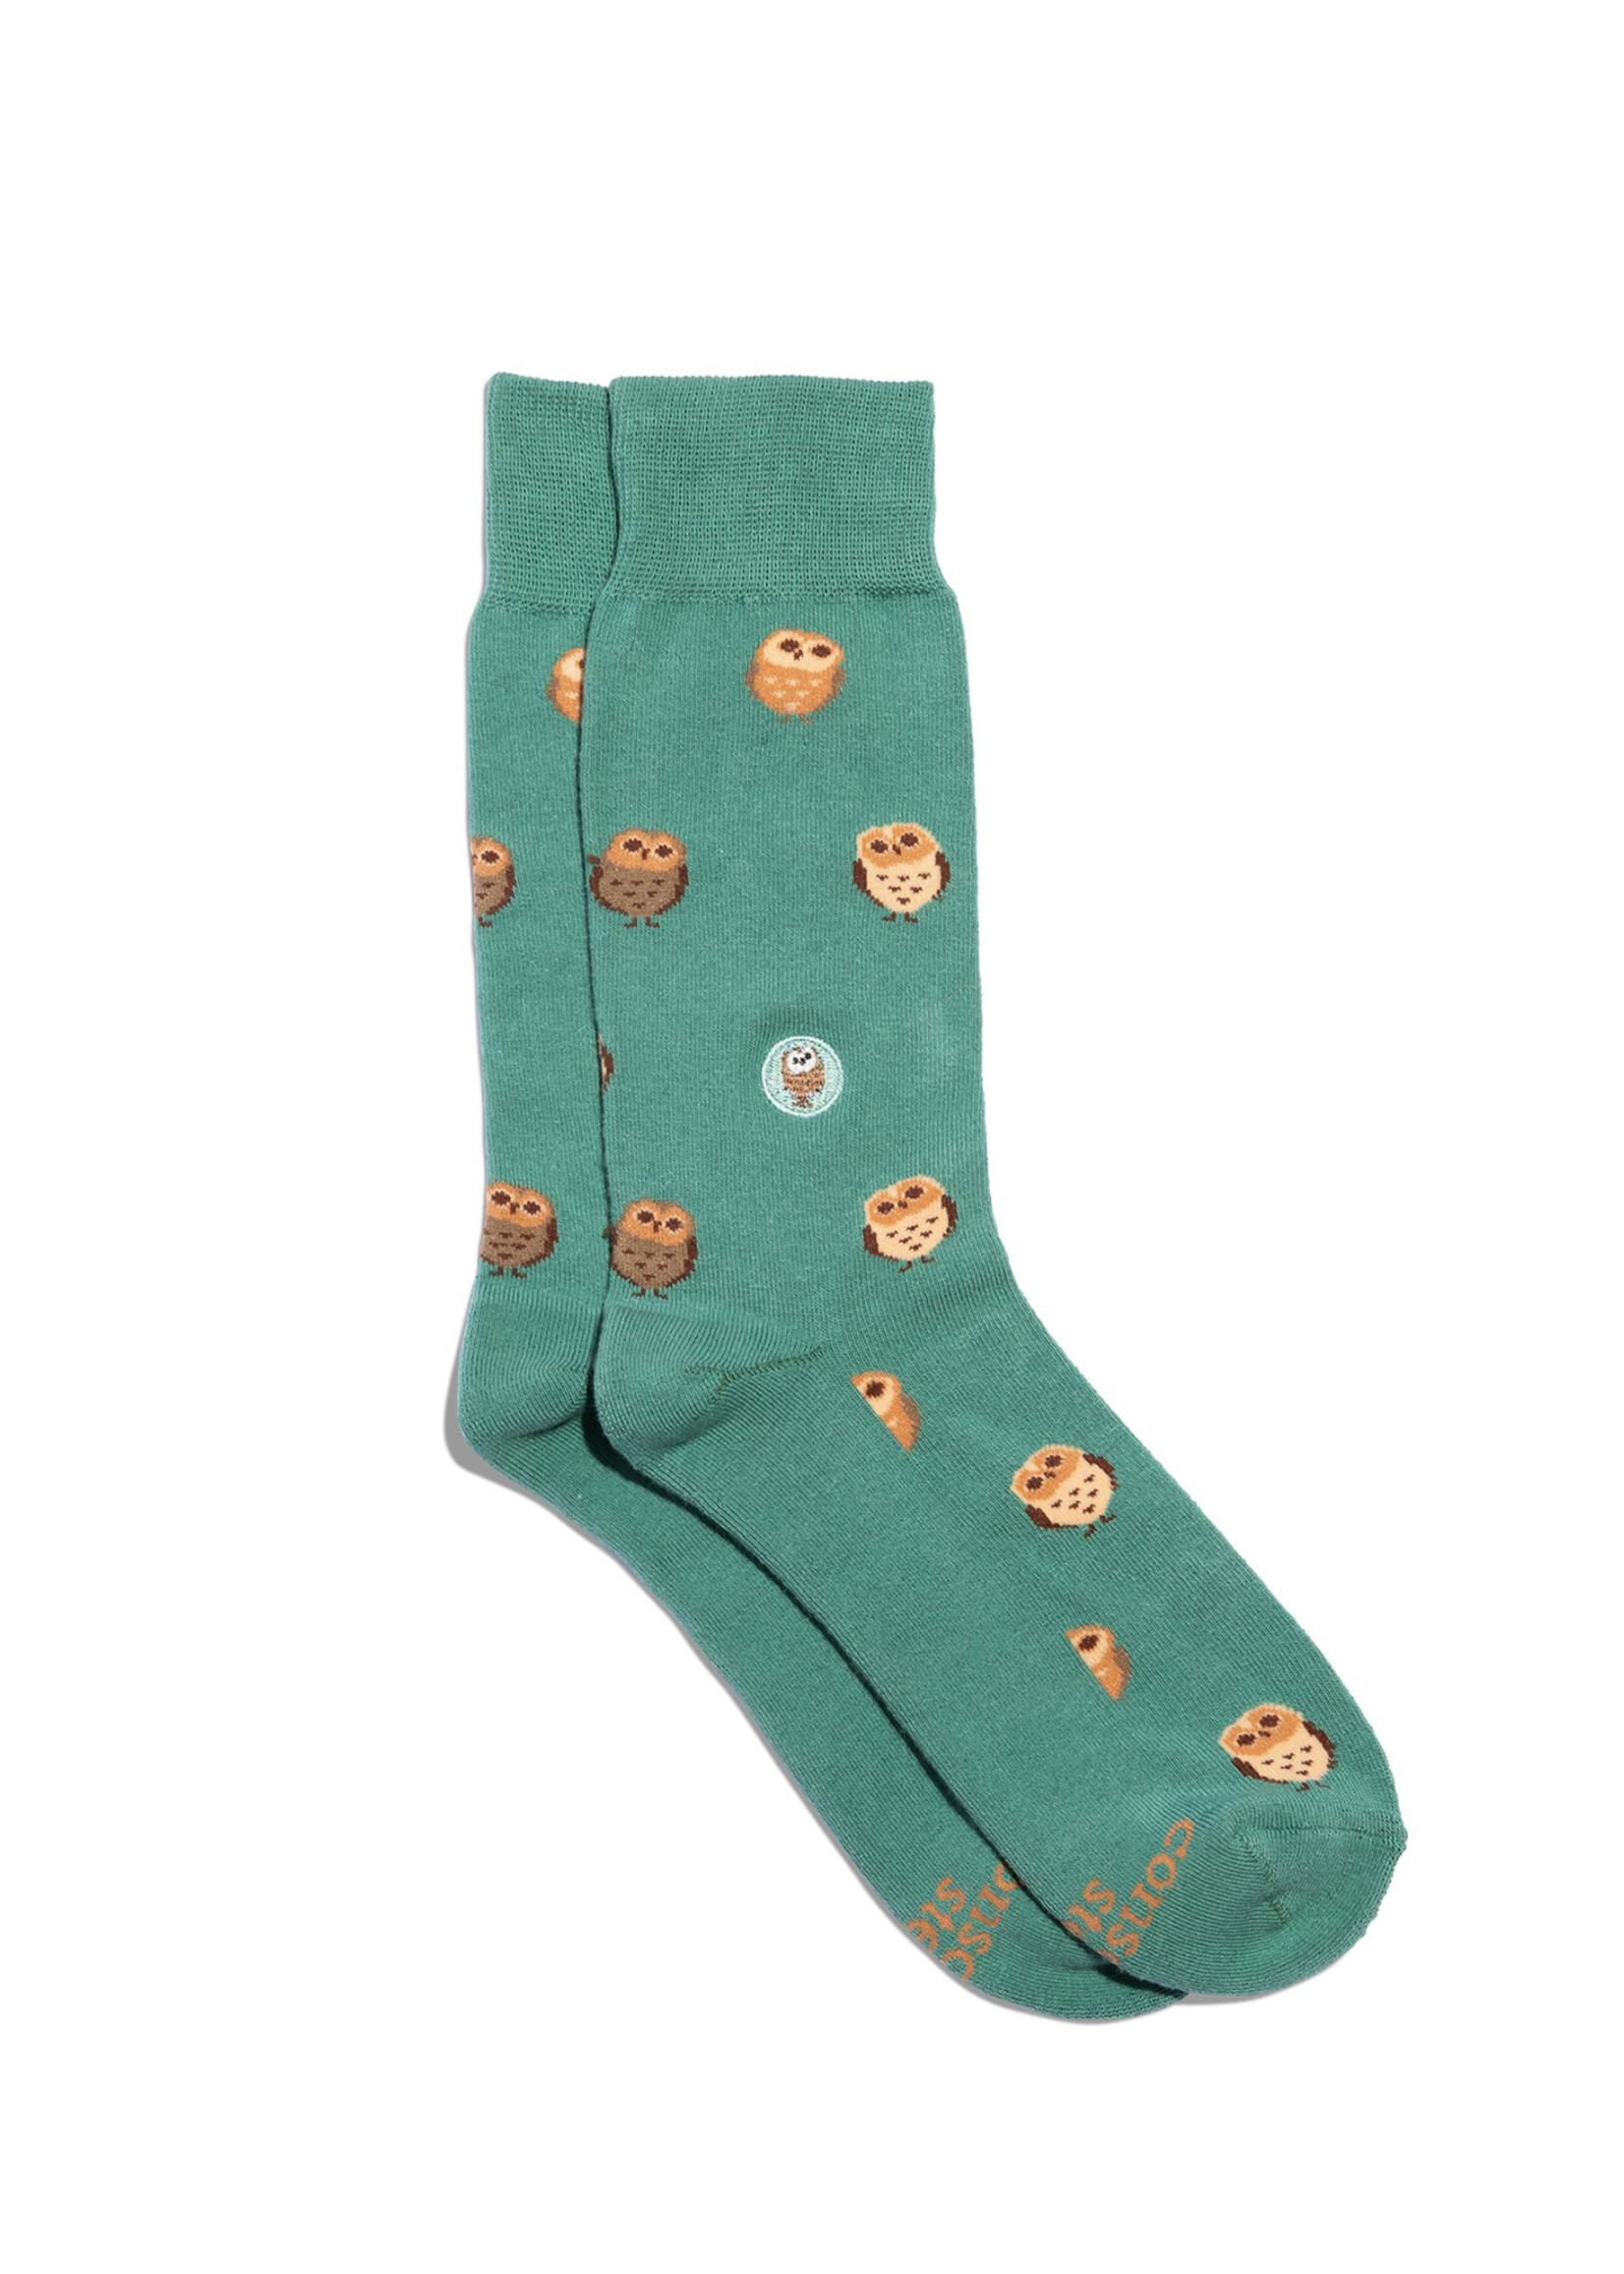 Conscious Step Women's Socks That Protect Owls